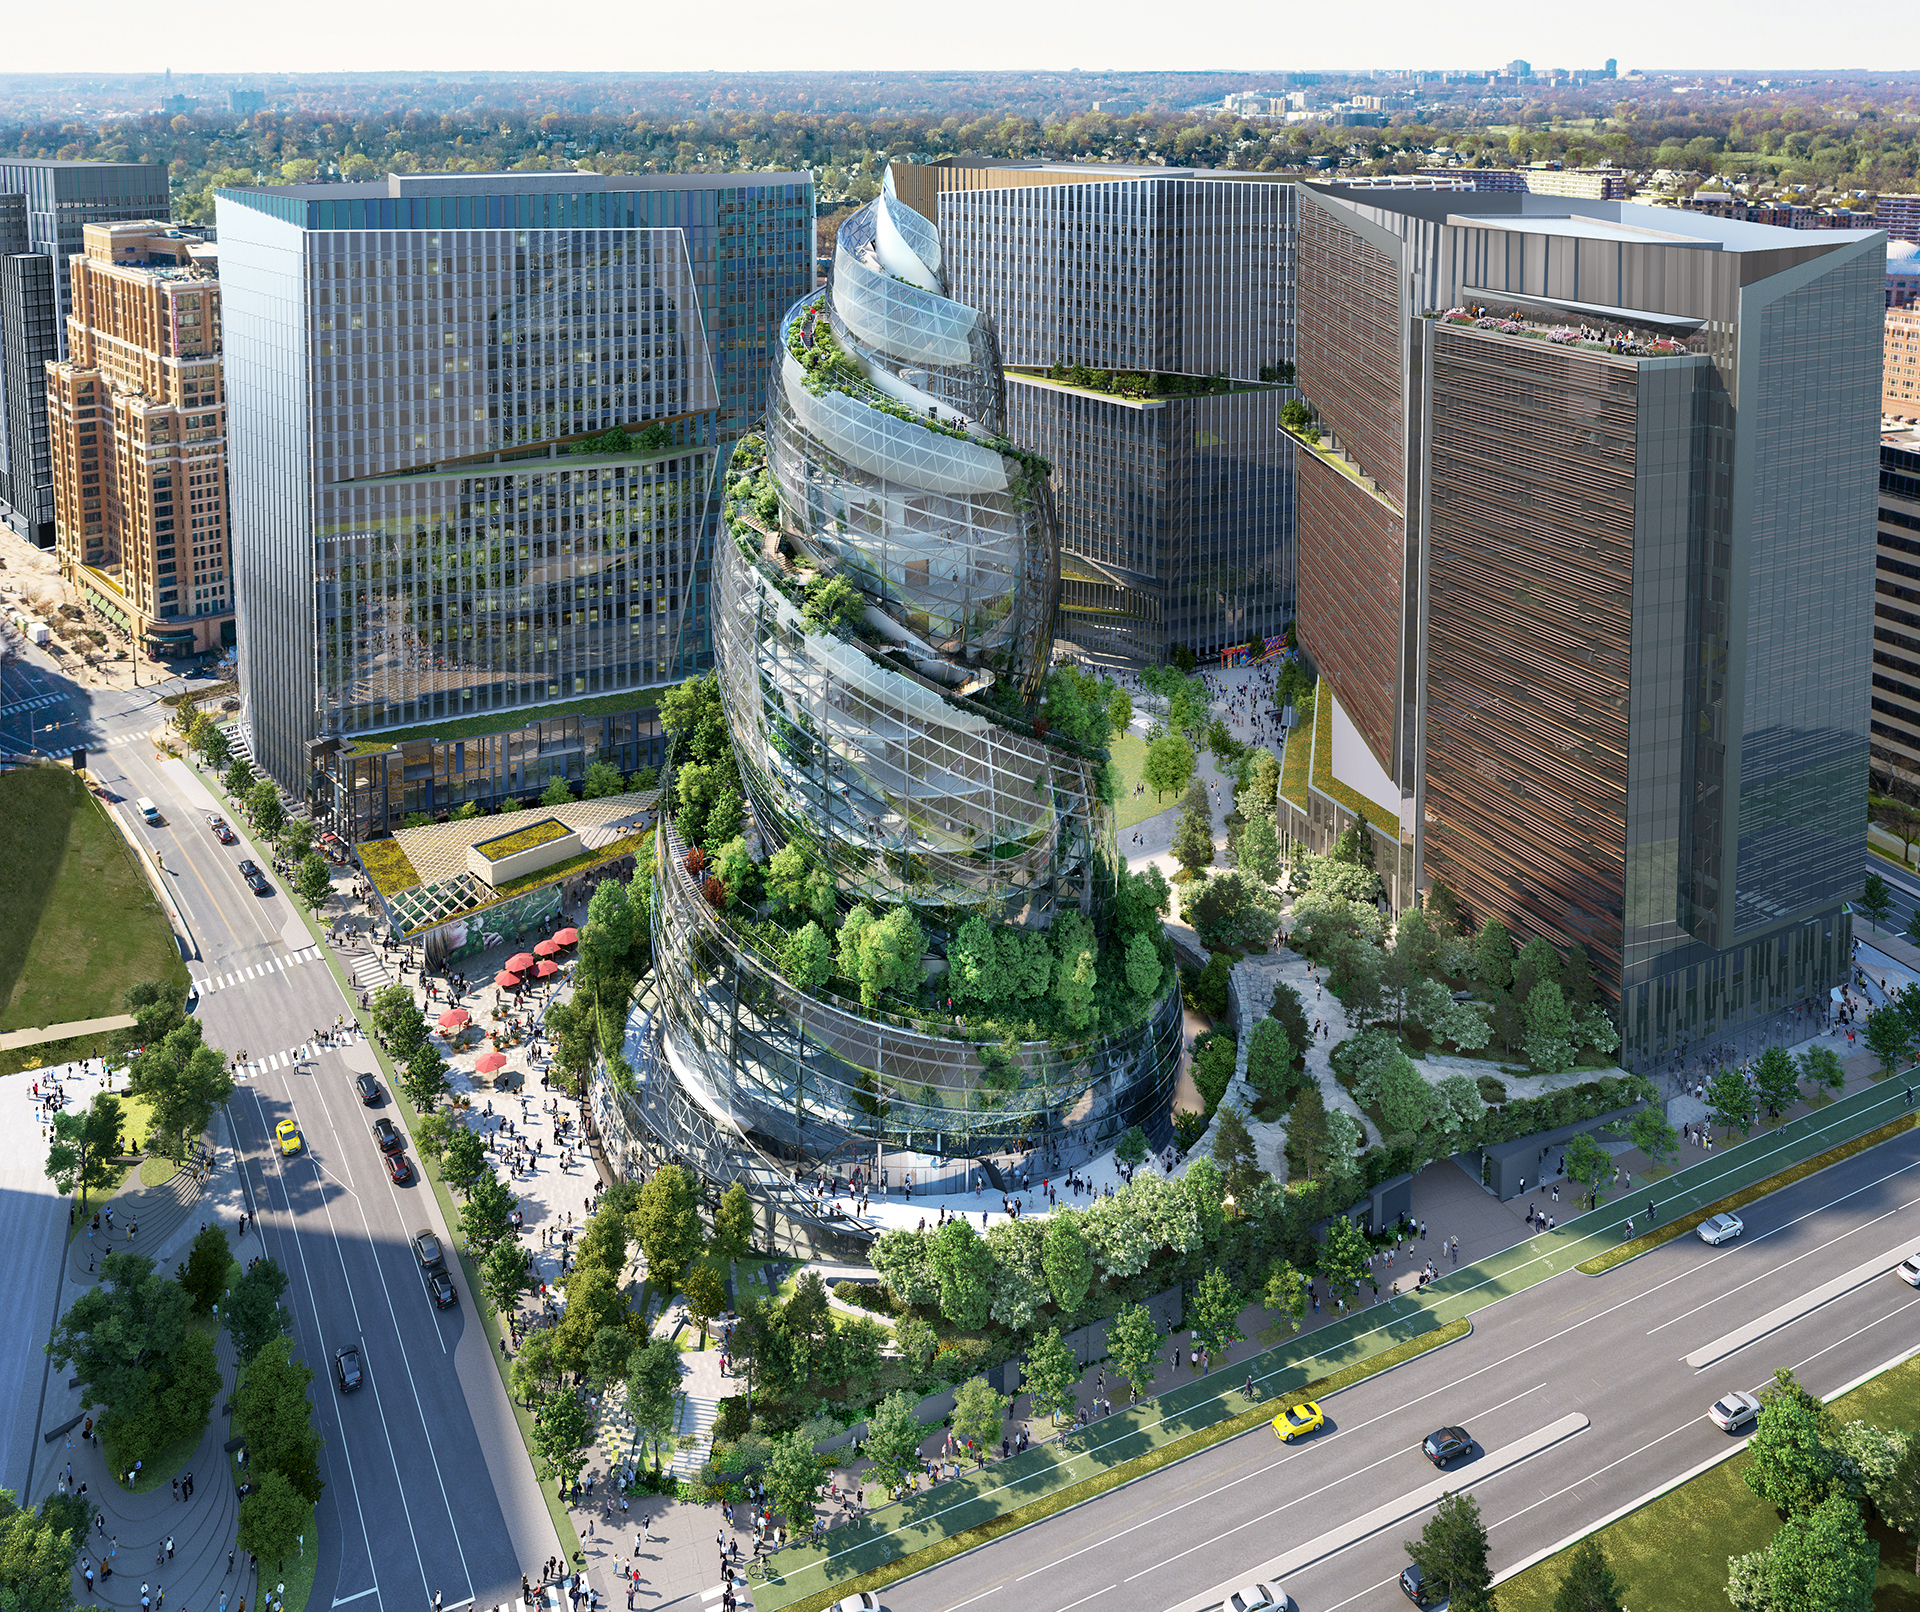 Spiral Glass Tower for Amazon HQ2 in Virginia